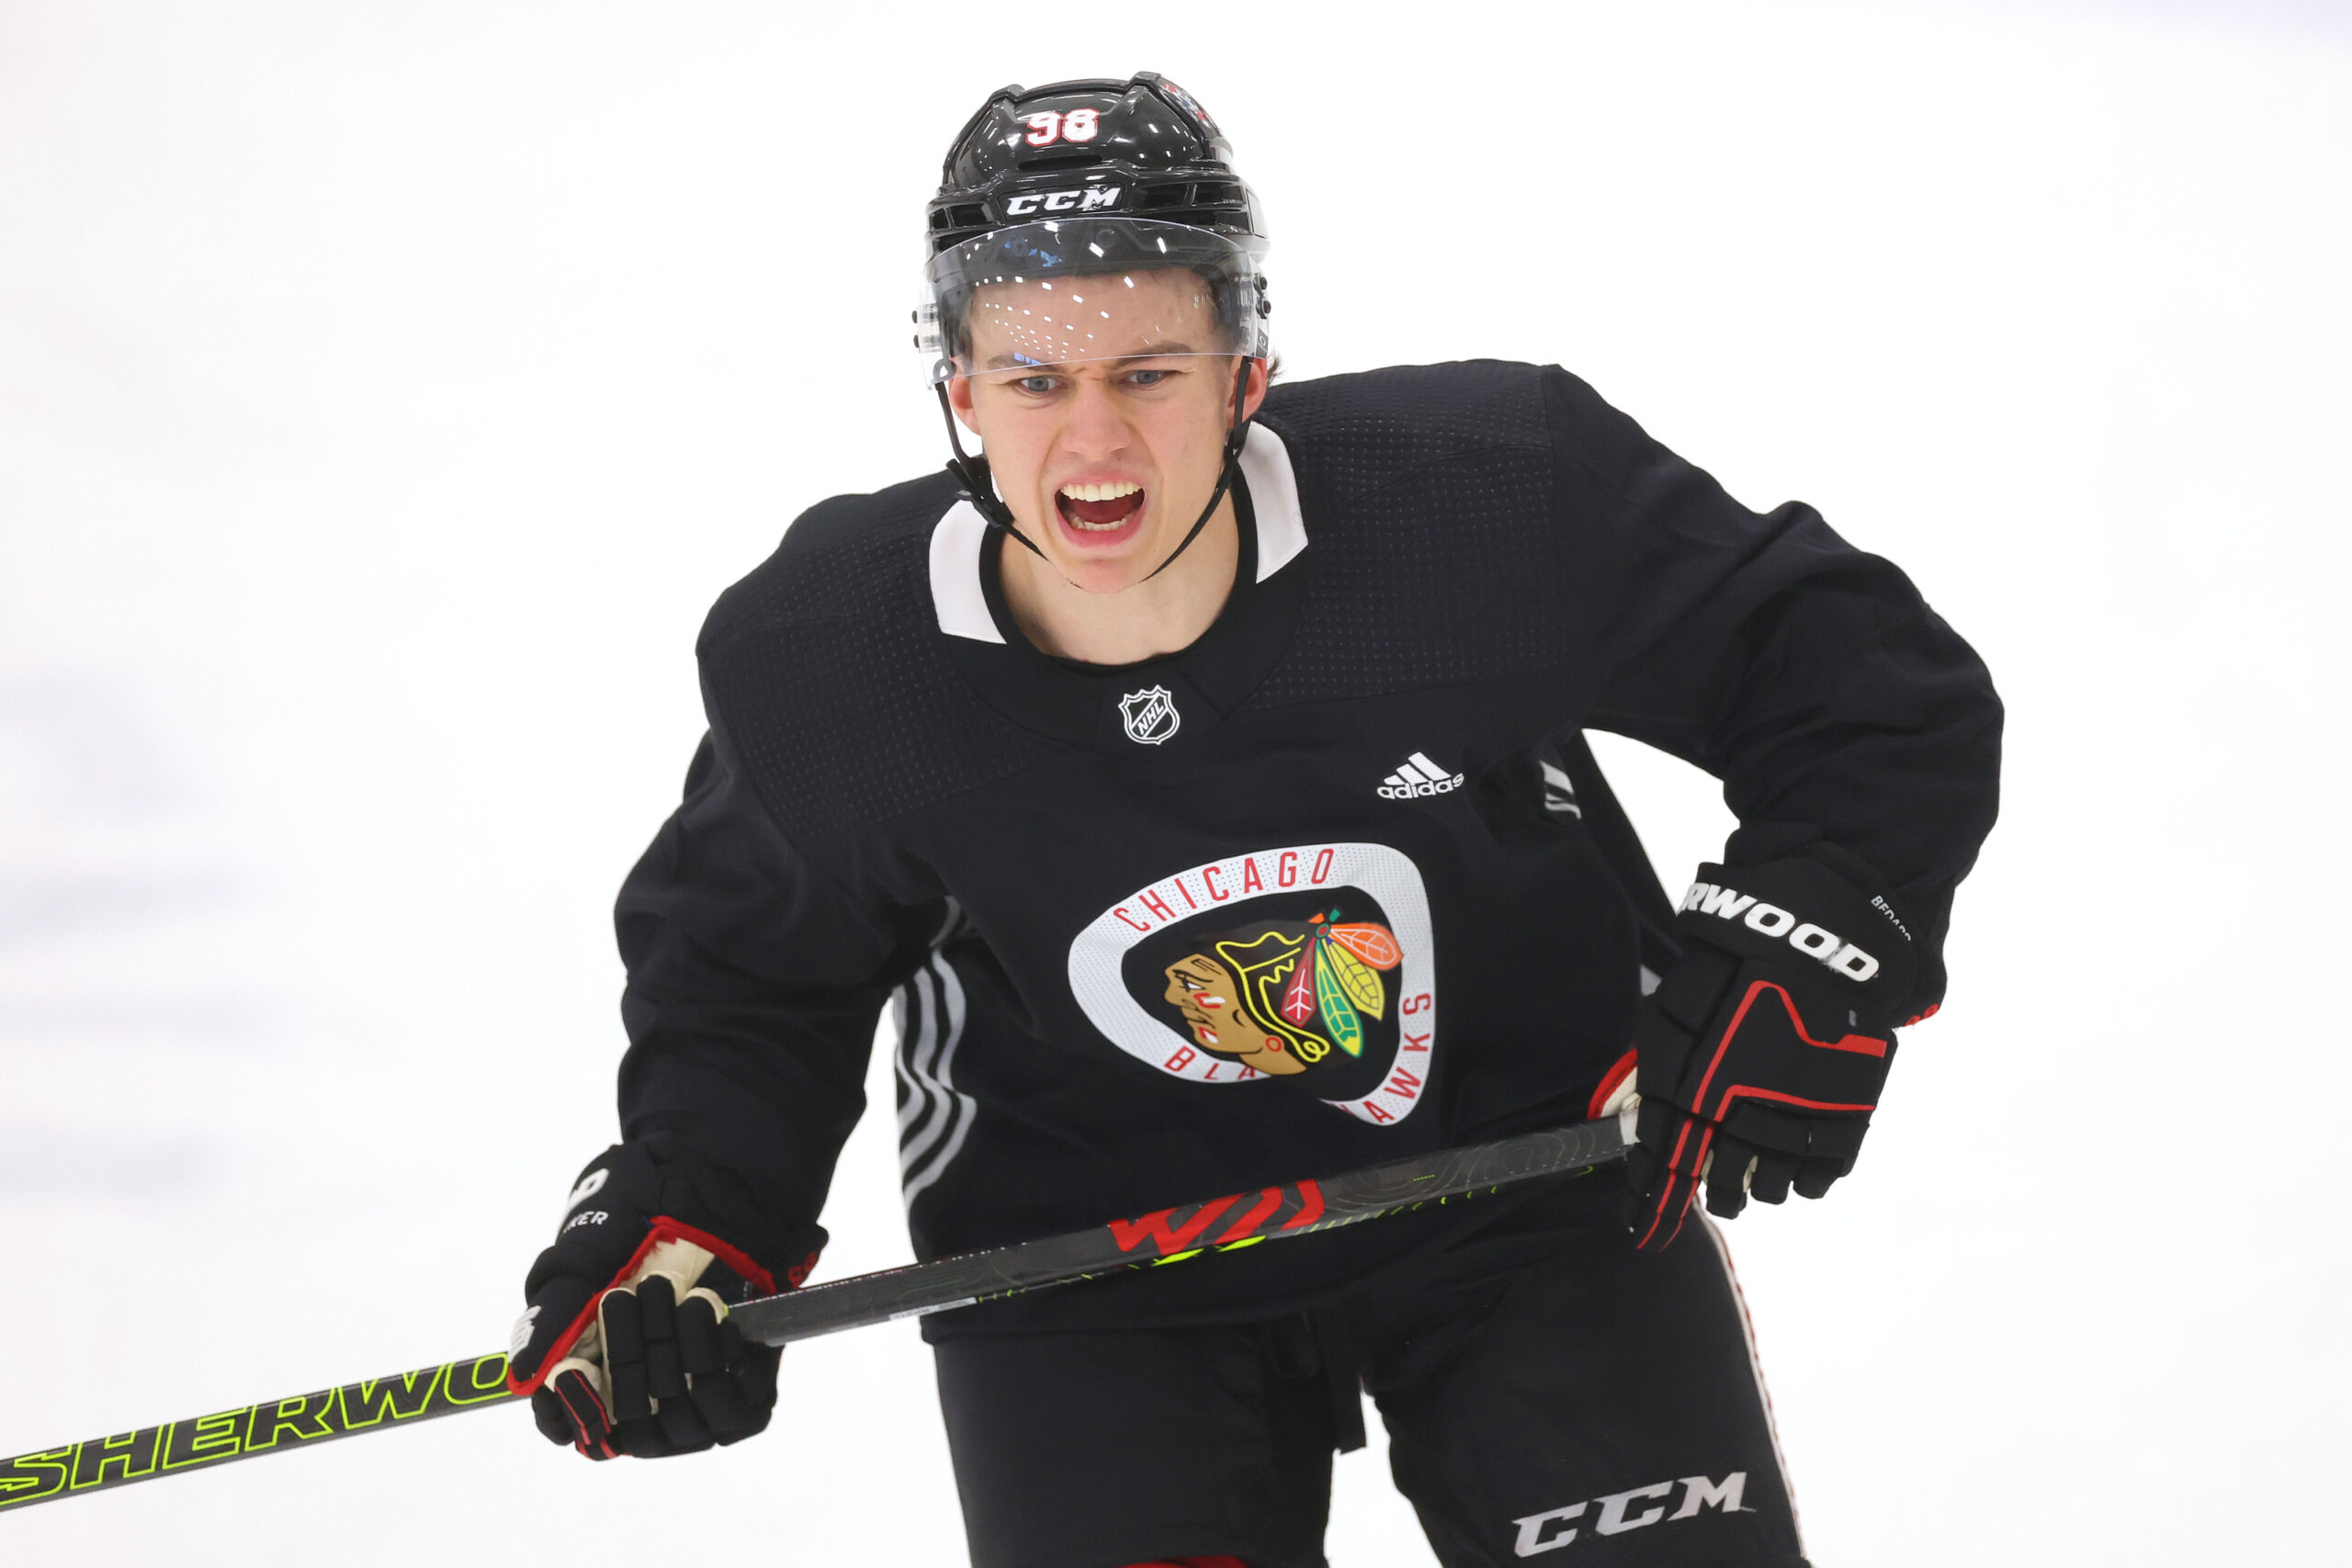 Connor Bedard, as expected, taken 1st in the NHL draft by Chicago